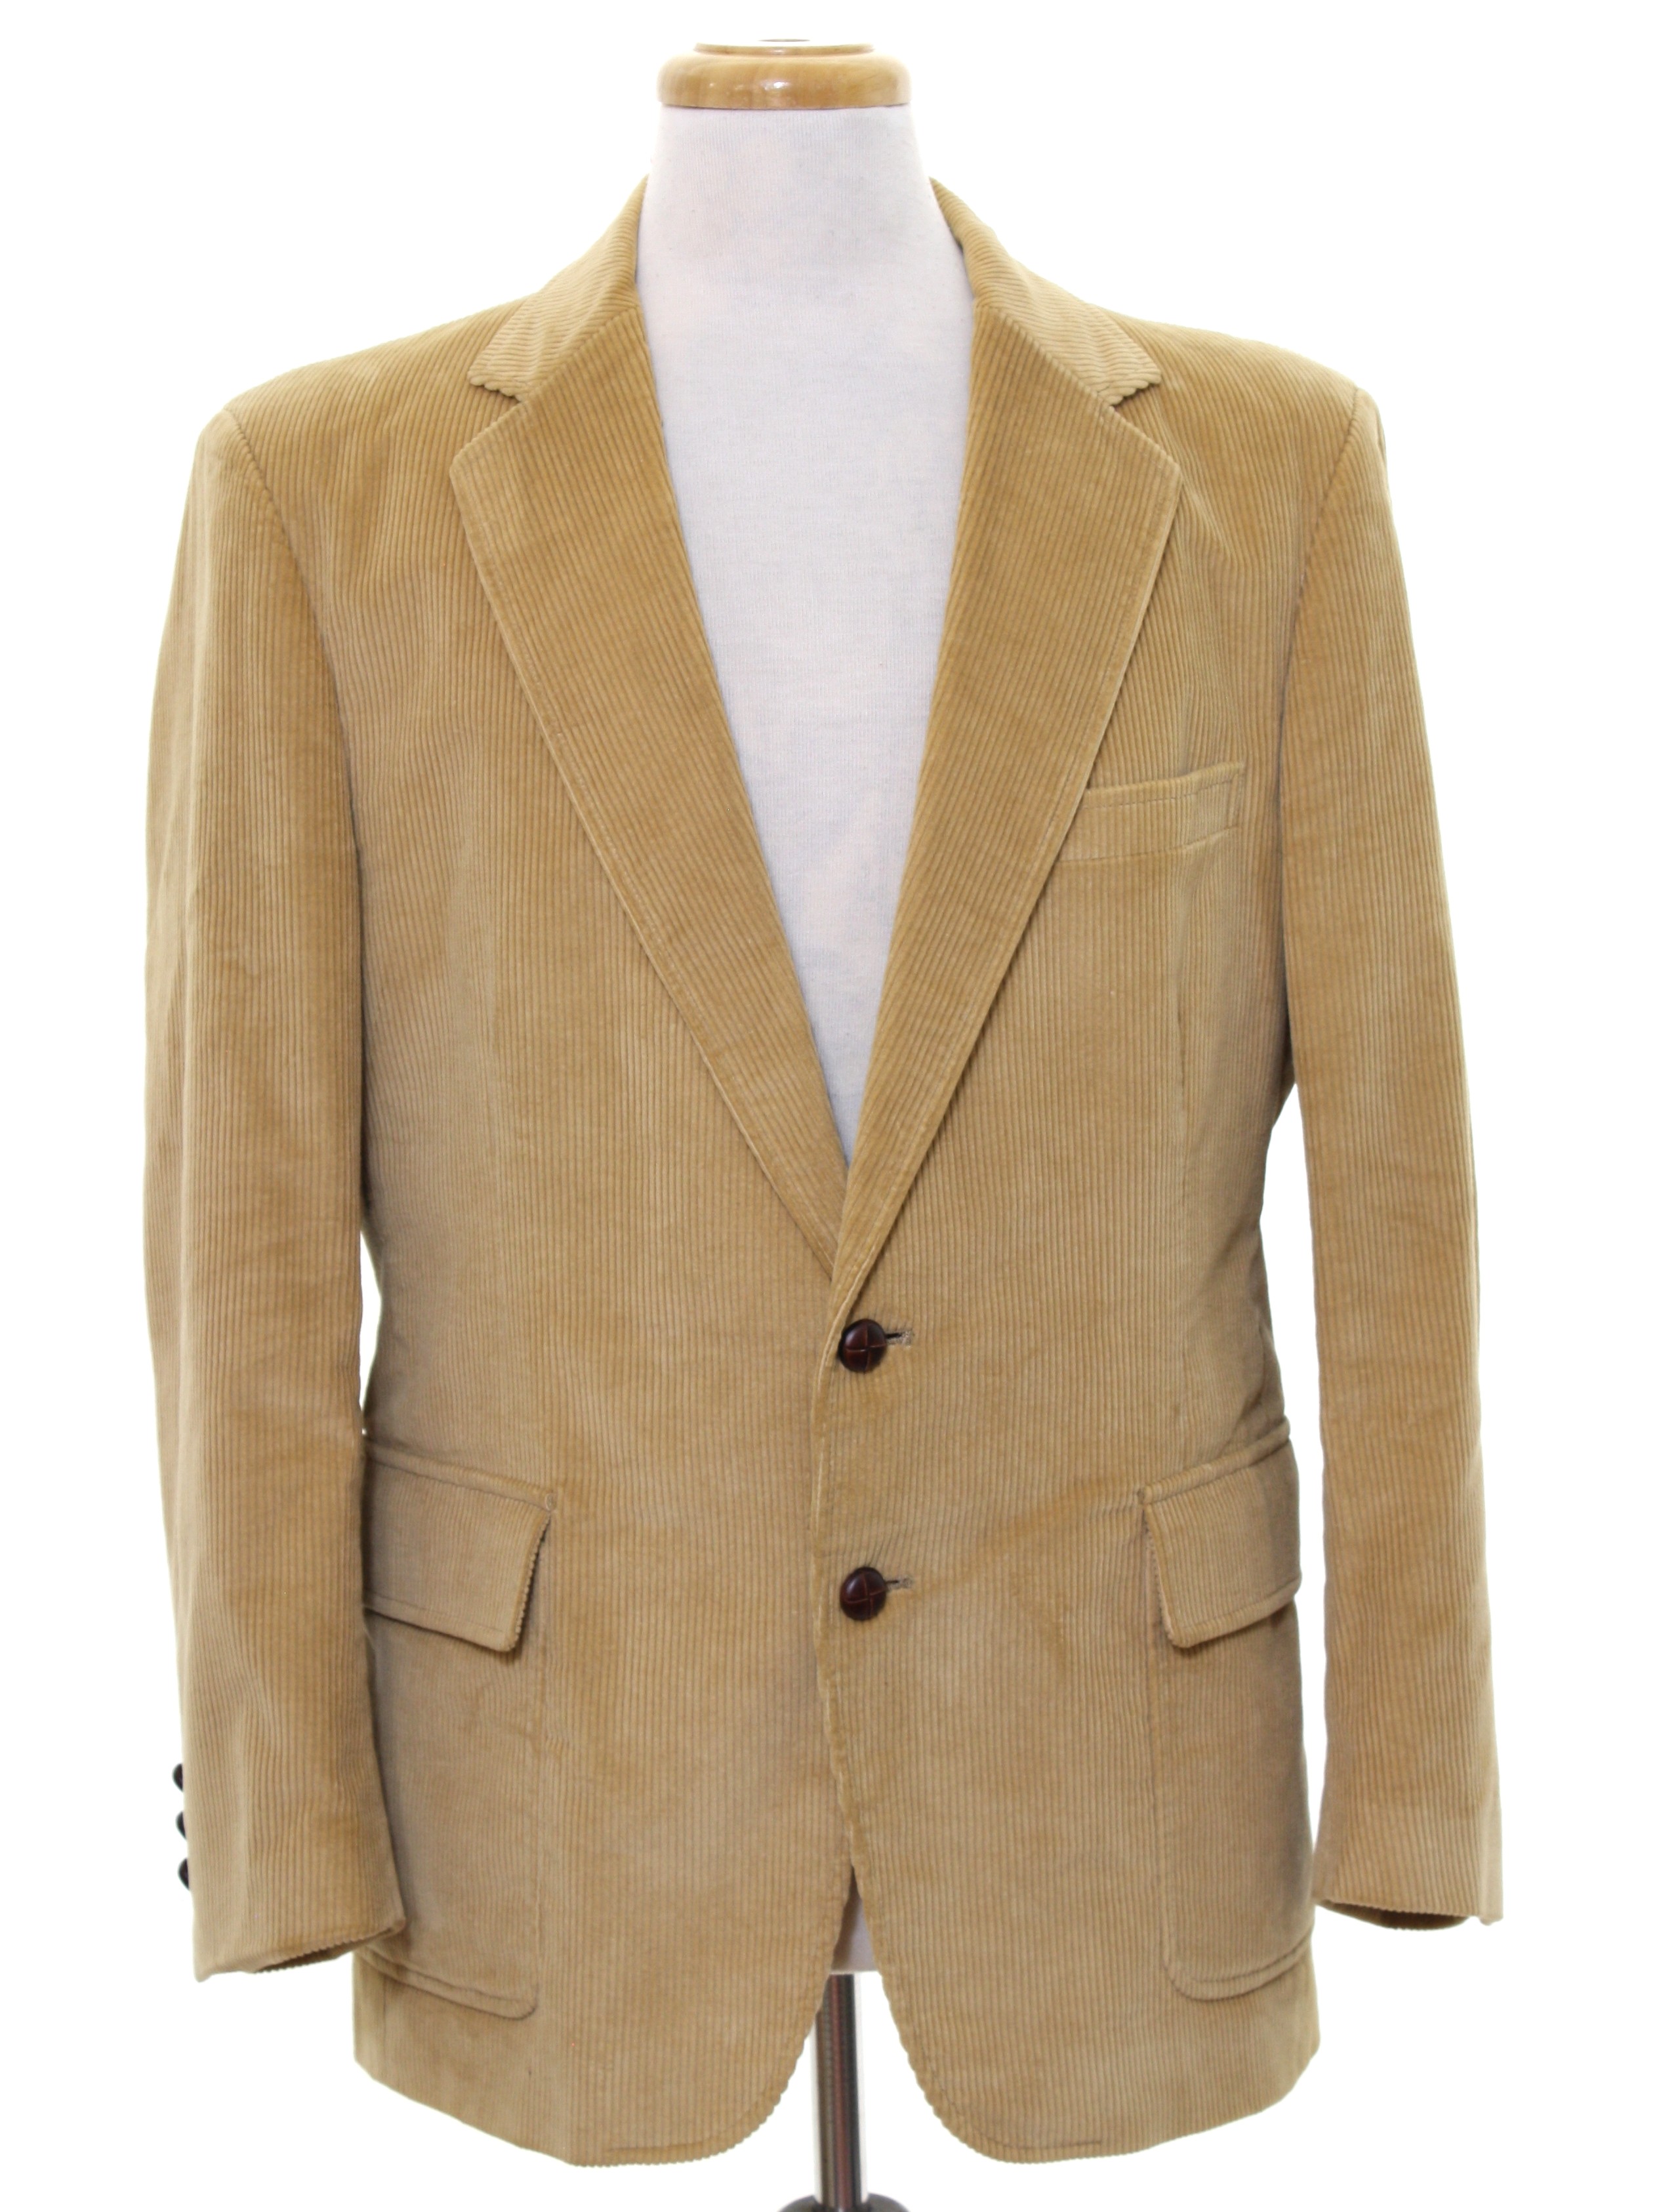 80's Vintage Jacket: 80s -The Mens Shop for JCPenney- Mens tan corduroy ...